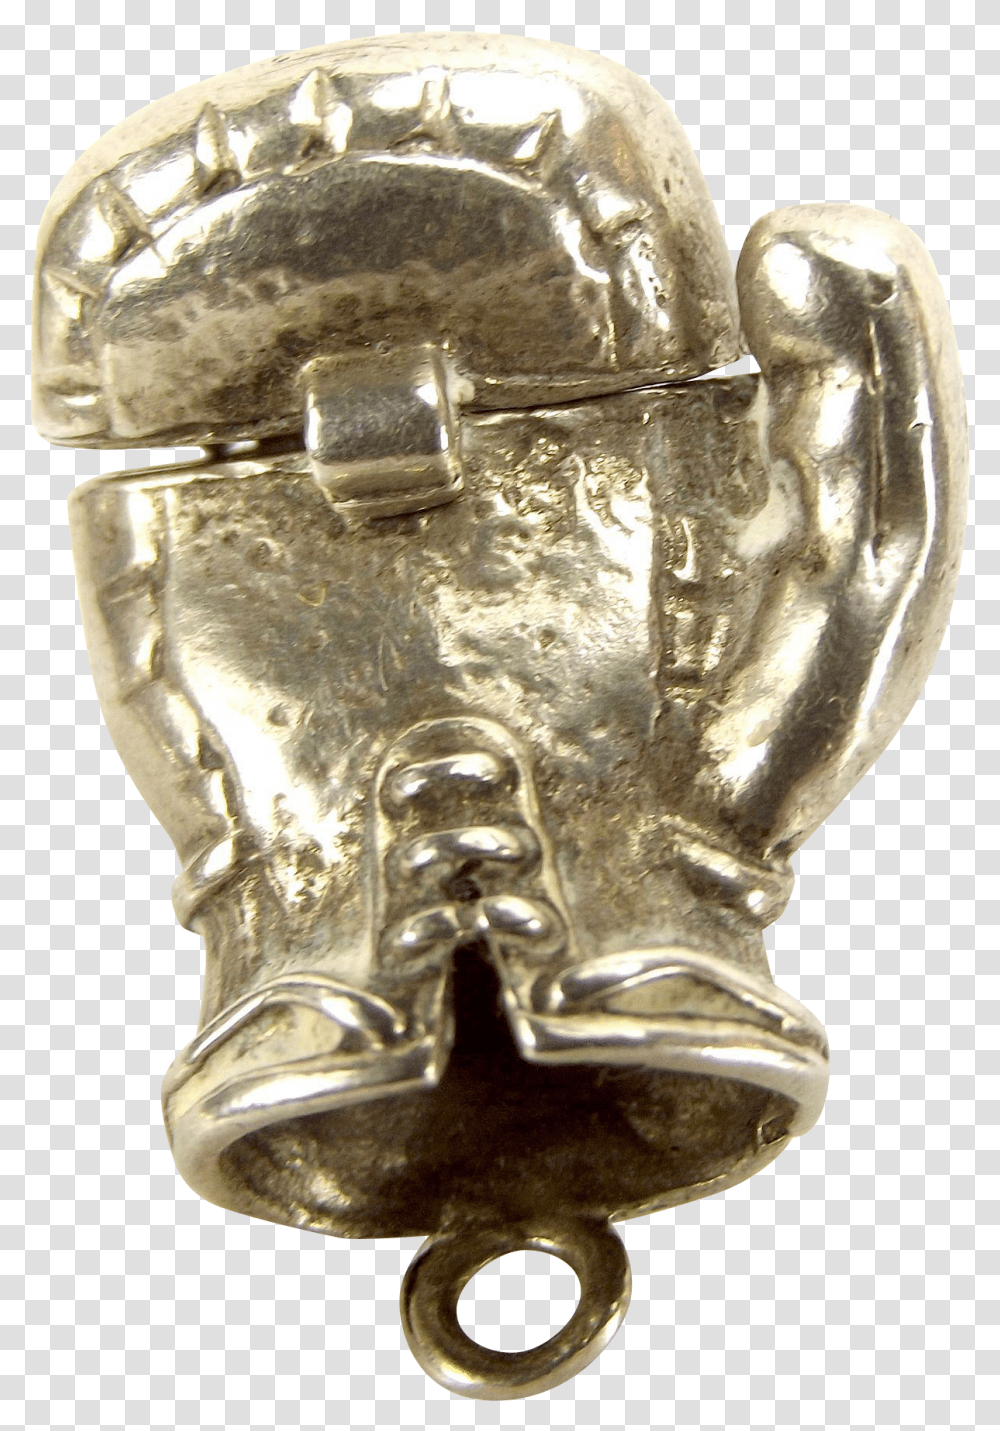 Vintage Silver Charm Boxing Glove Opens 2 Boxers In Antique, Helmet, Apparel, Coin Transparent Png